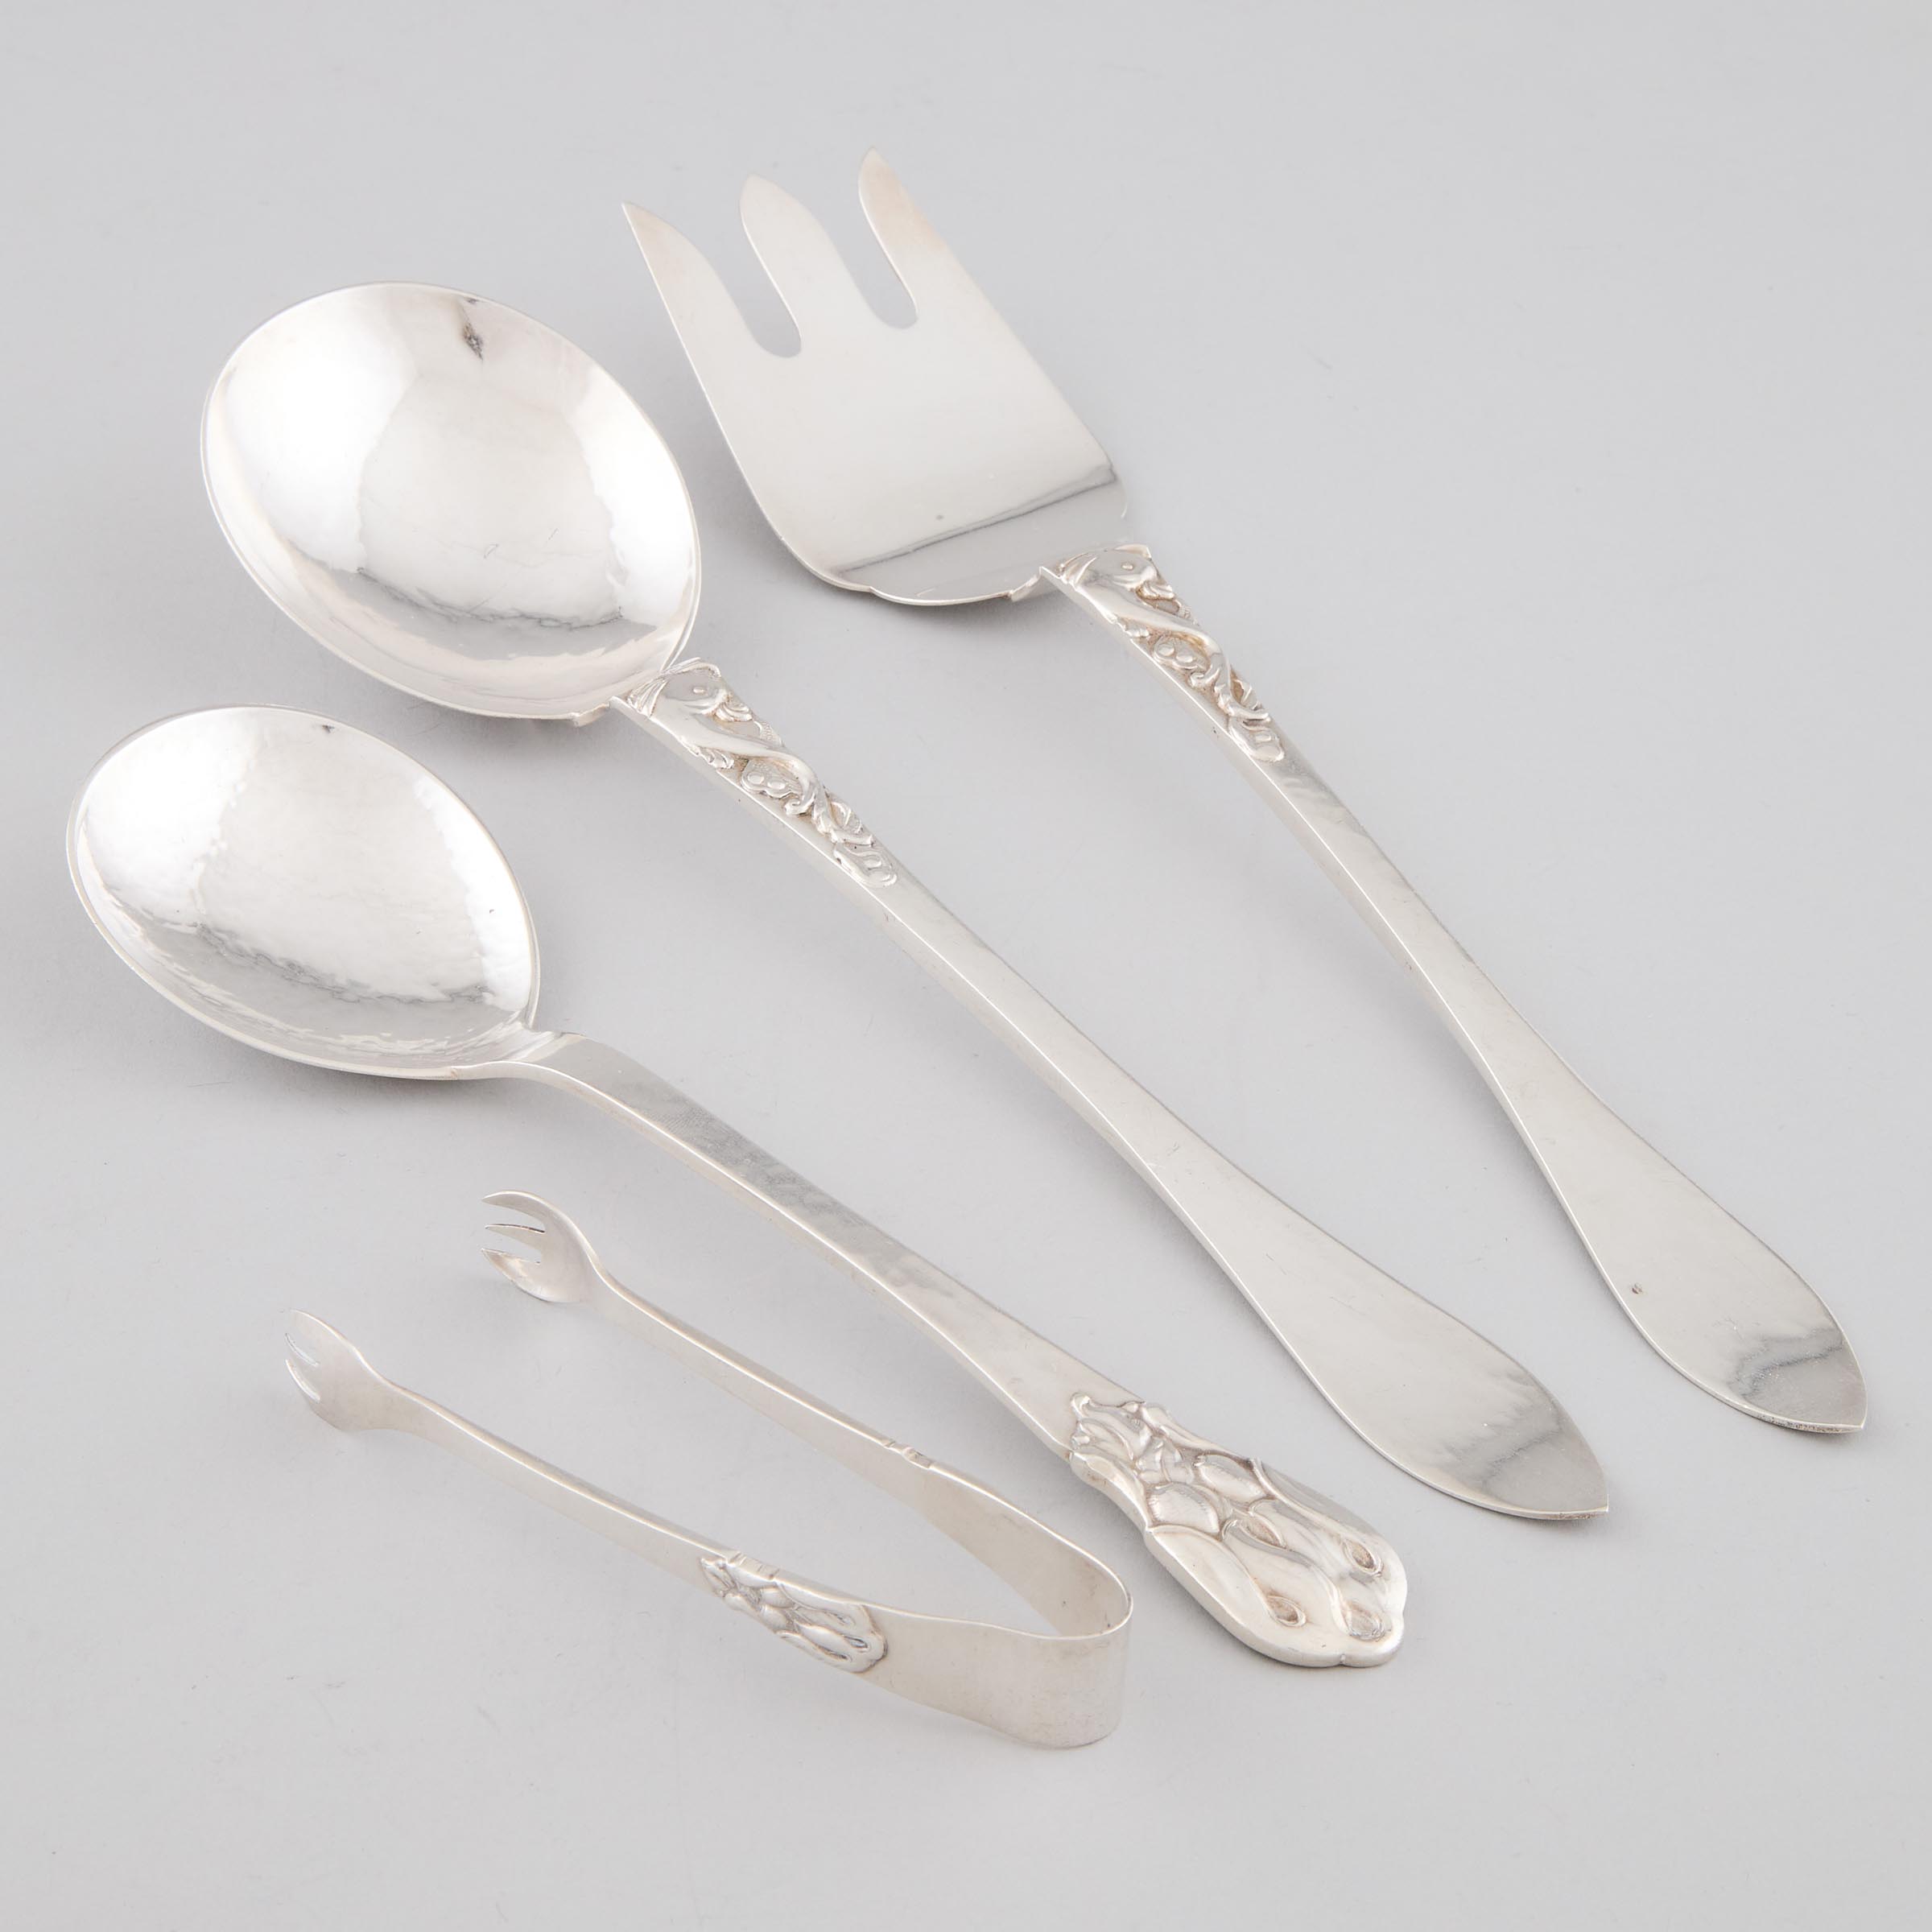 Pair of Canadian Silver Salad Servers,